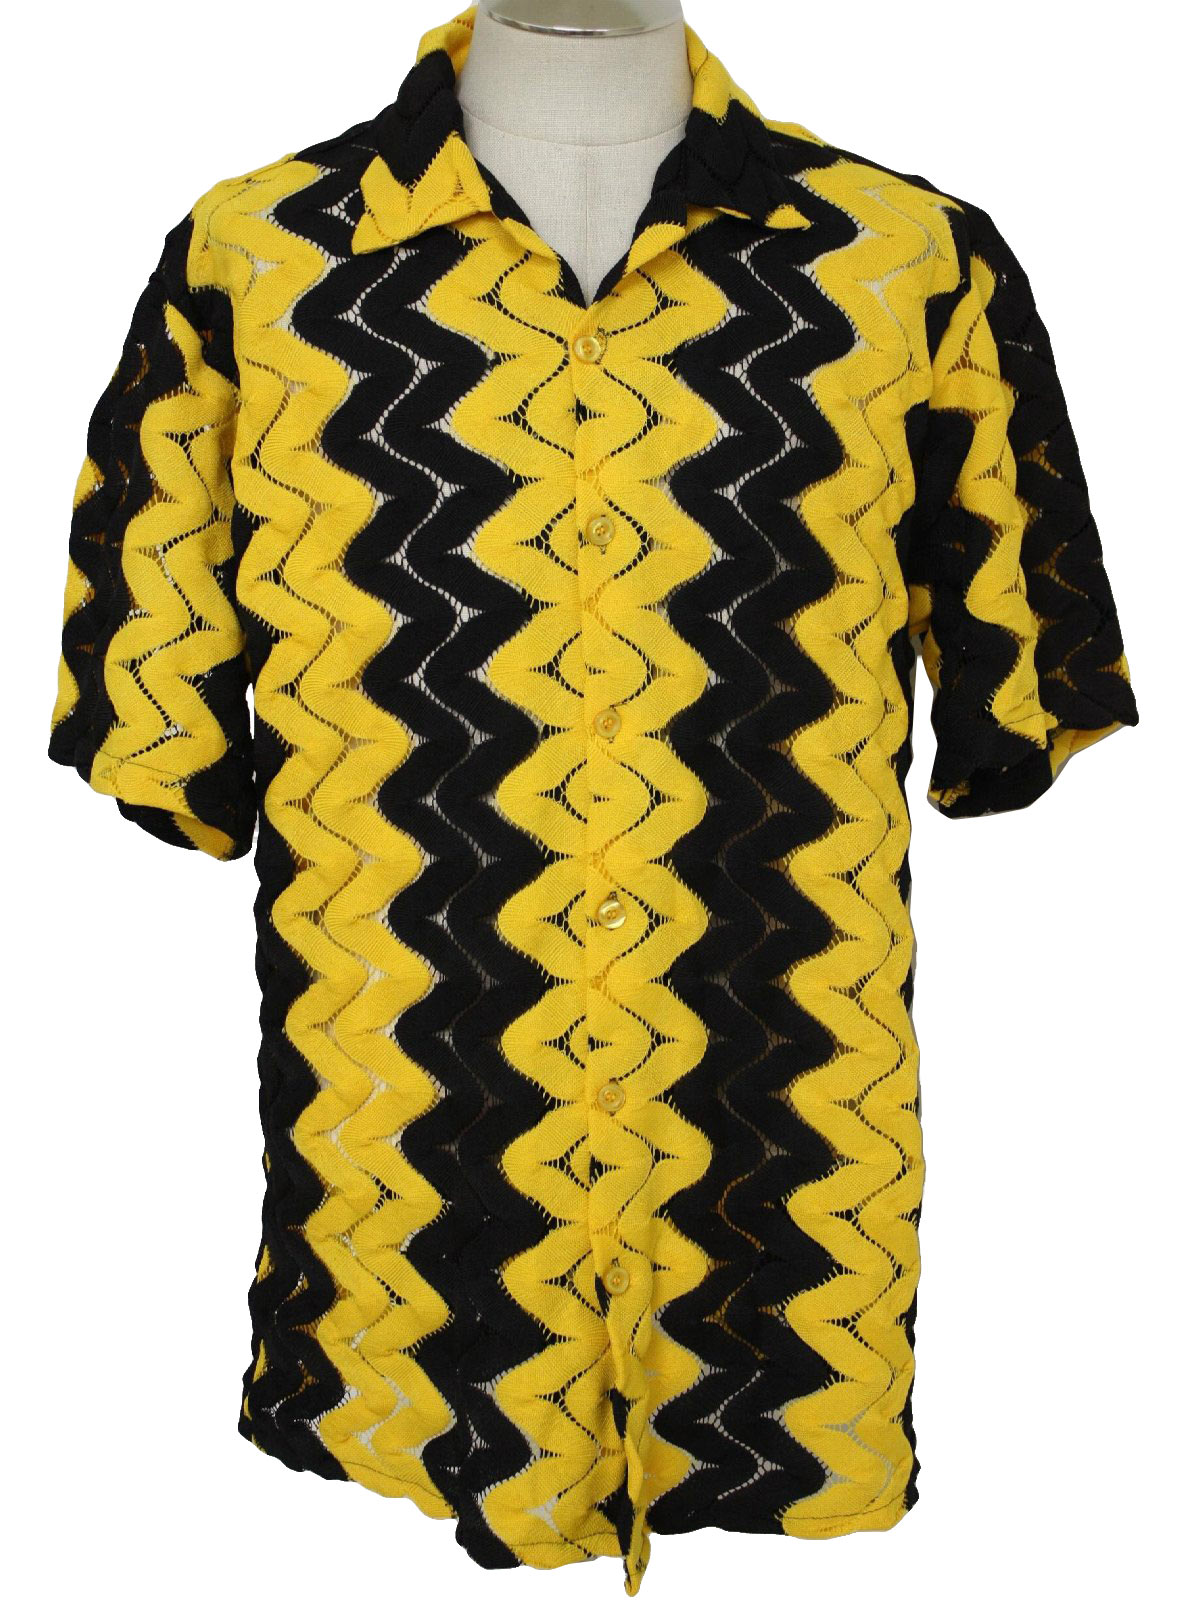 Retro 90s Shirt (Trust) : 90s -Trust- Mens black and yellow polyester ...